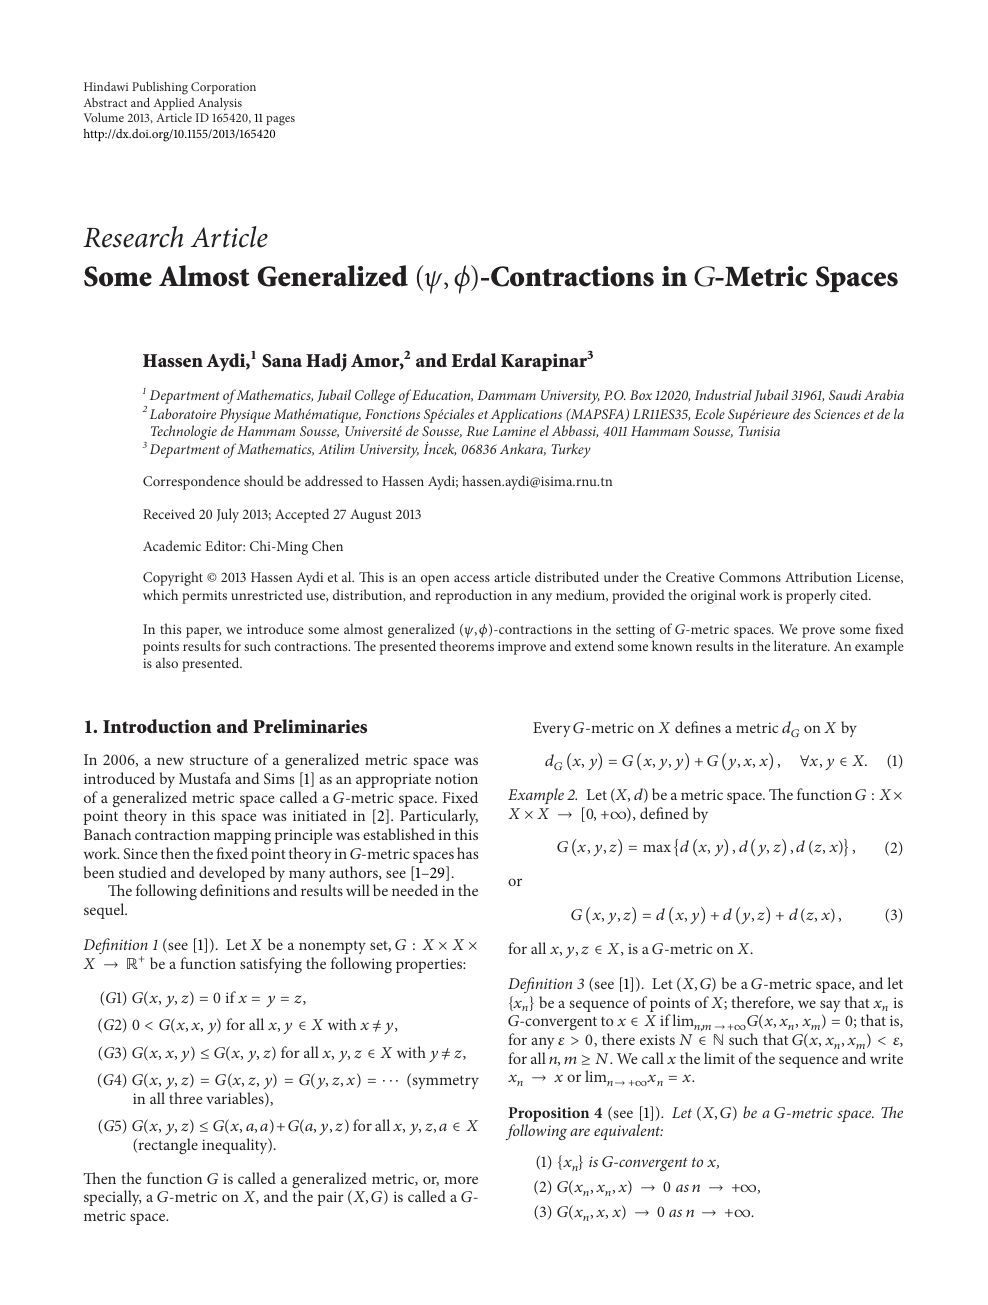 Some Almost Generalized Contractions In Metric Spaces Topic Of Research Paper In Mathematics Download Scholarly Article Pdf And Read For Free On Cyberleninka Open Science Hub